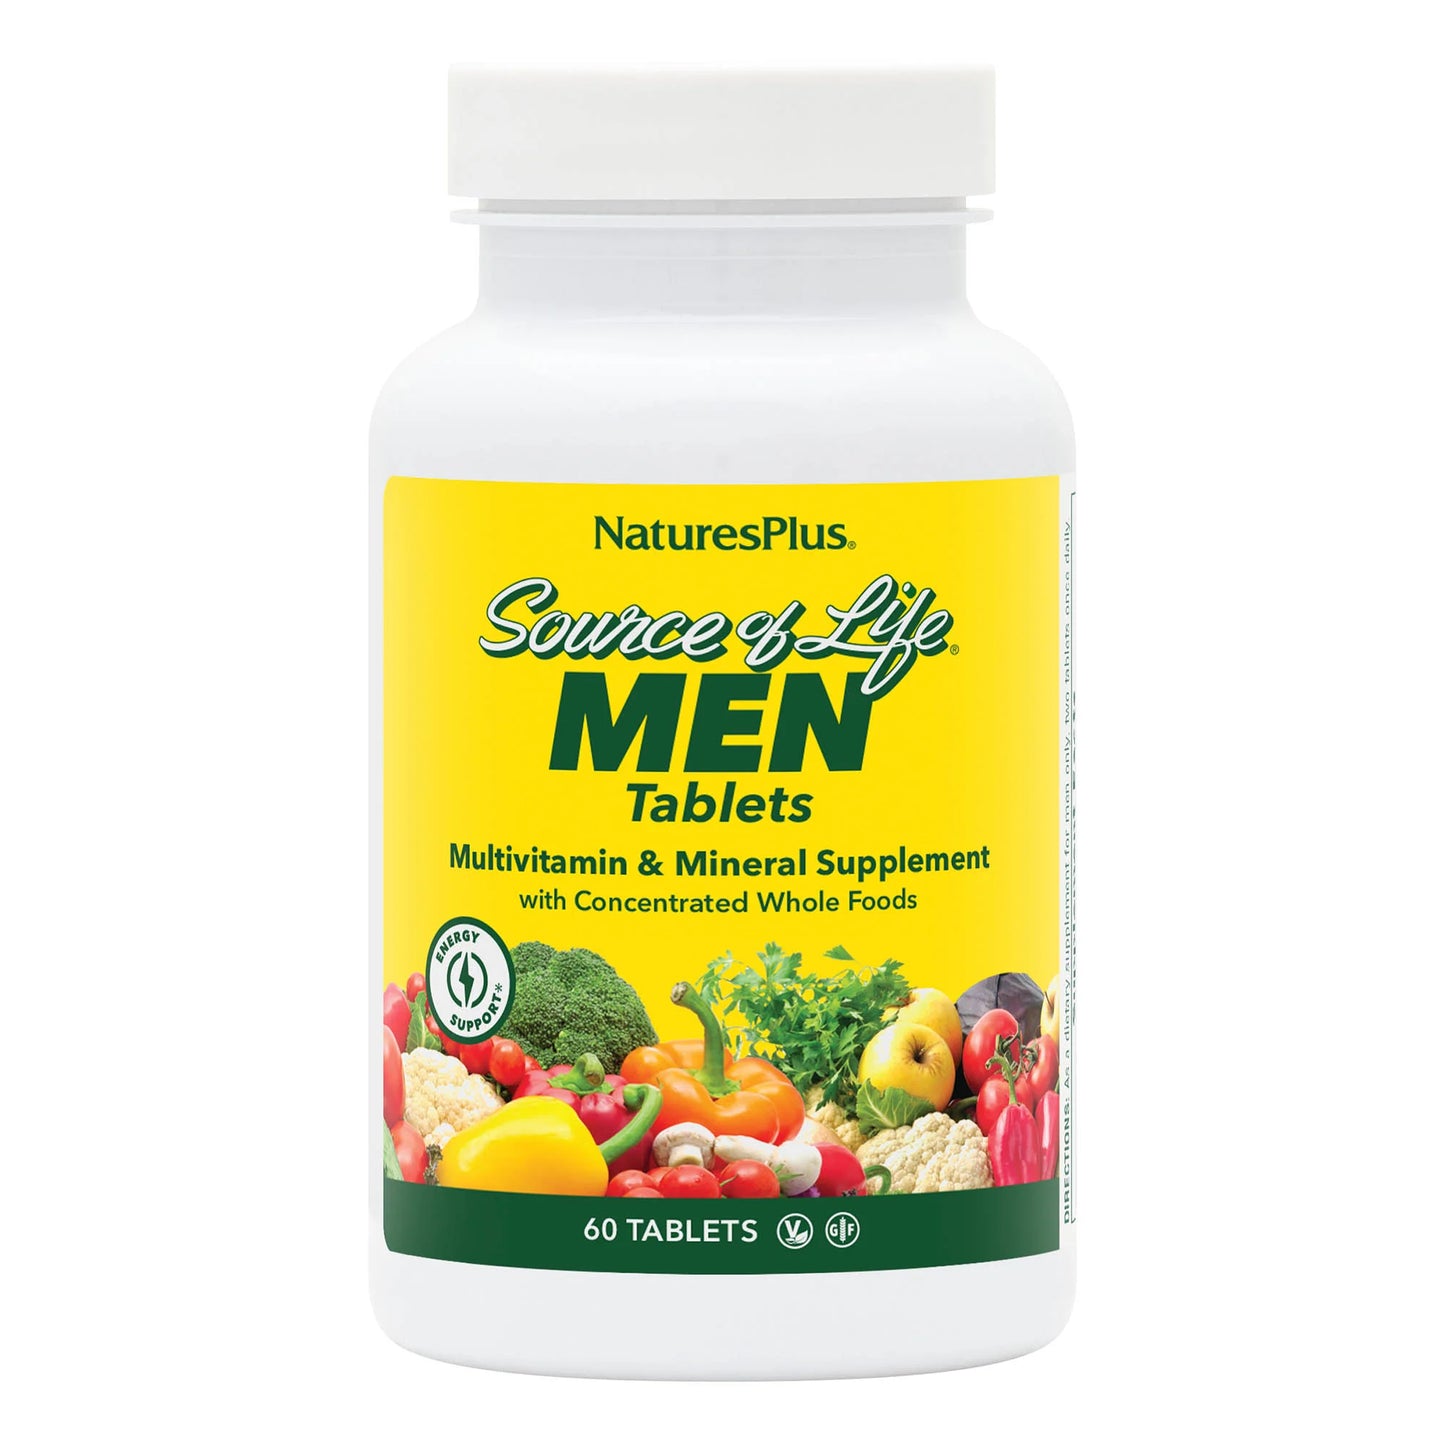 Natures Plus Source of Life® Men Tablets 60's